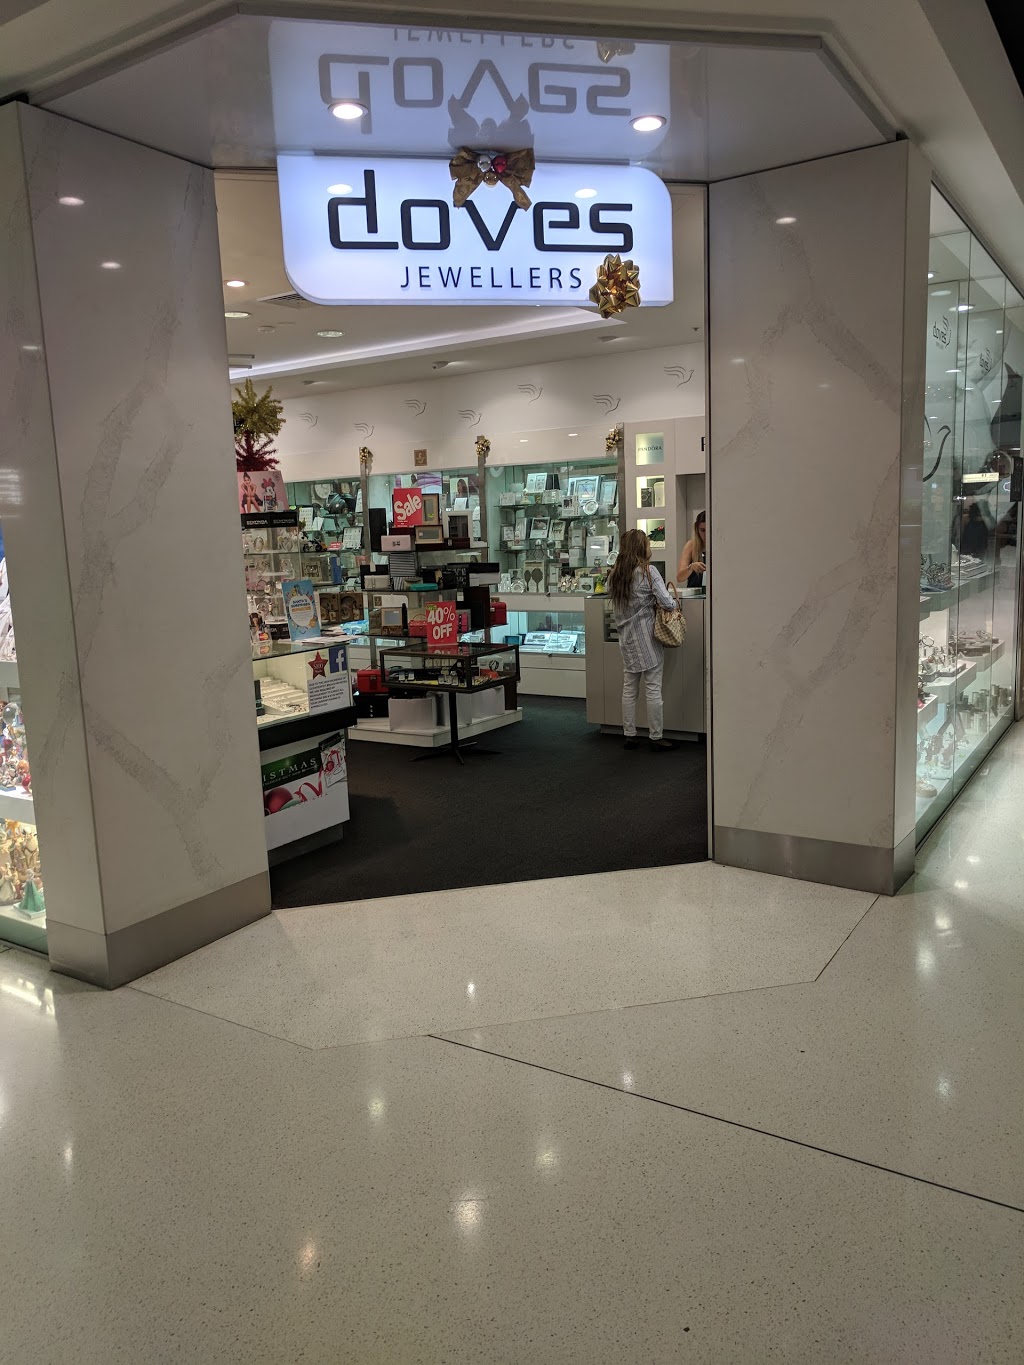 Doves Jewellers | Shop 29 The Village Shopping Center 10 Charles Hackett Drive St Marys NSW 2760 AU, 10 Charles Hackett Dr, St Marys NSW 2760, Australia | Phone: (02) 9623 1655